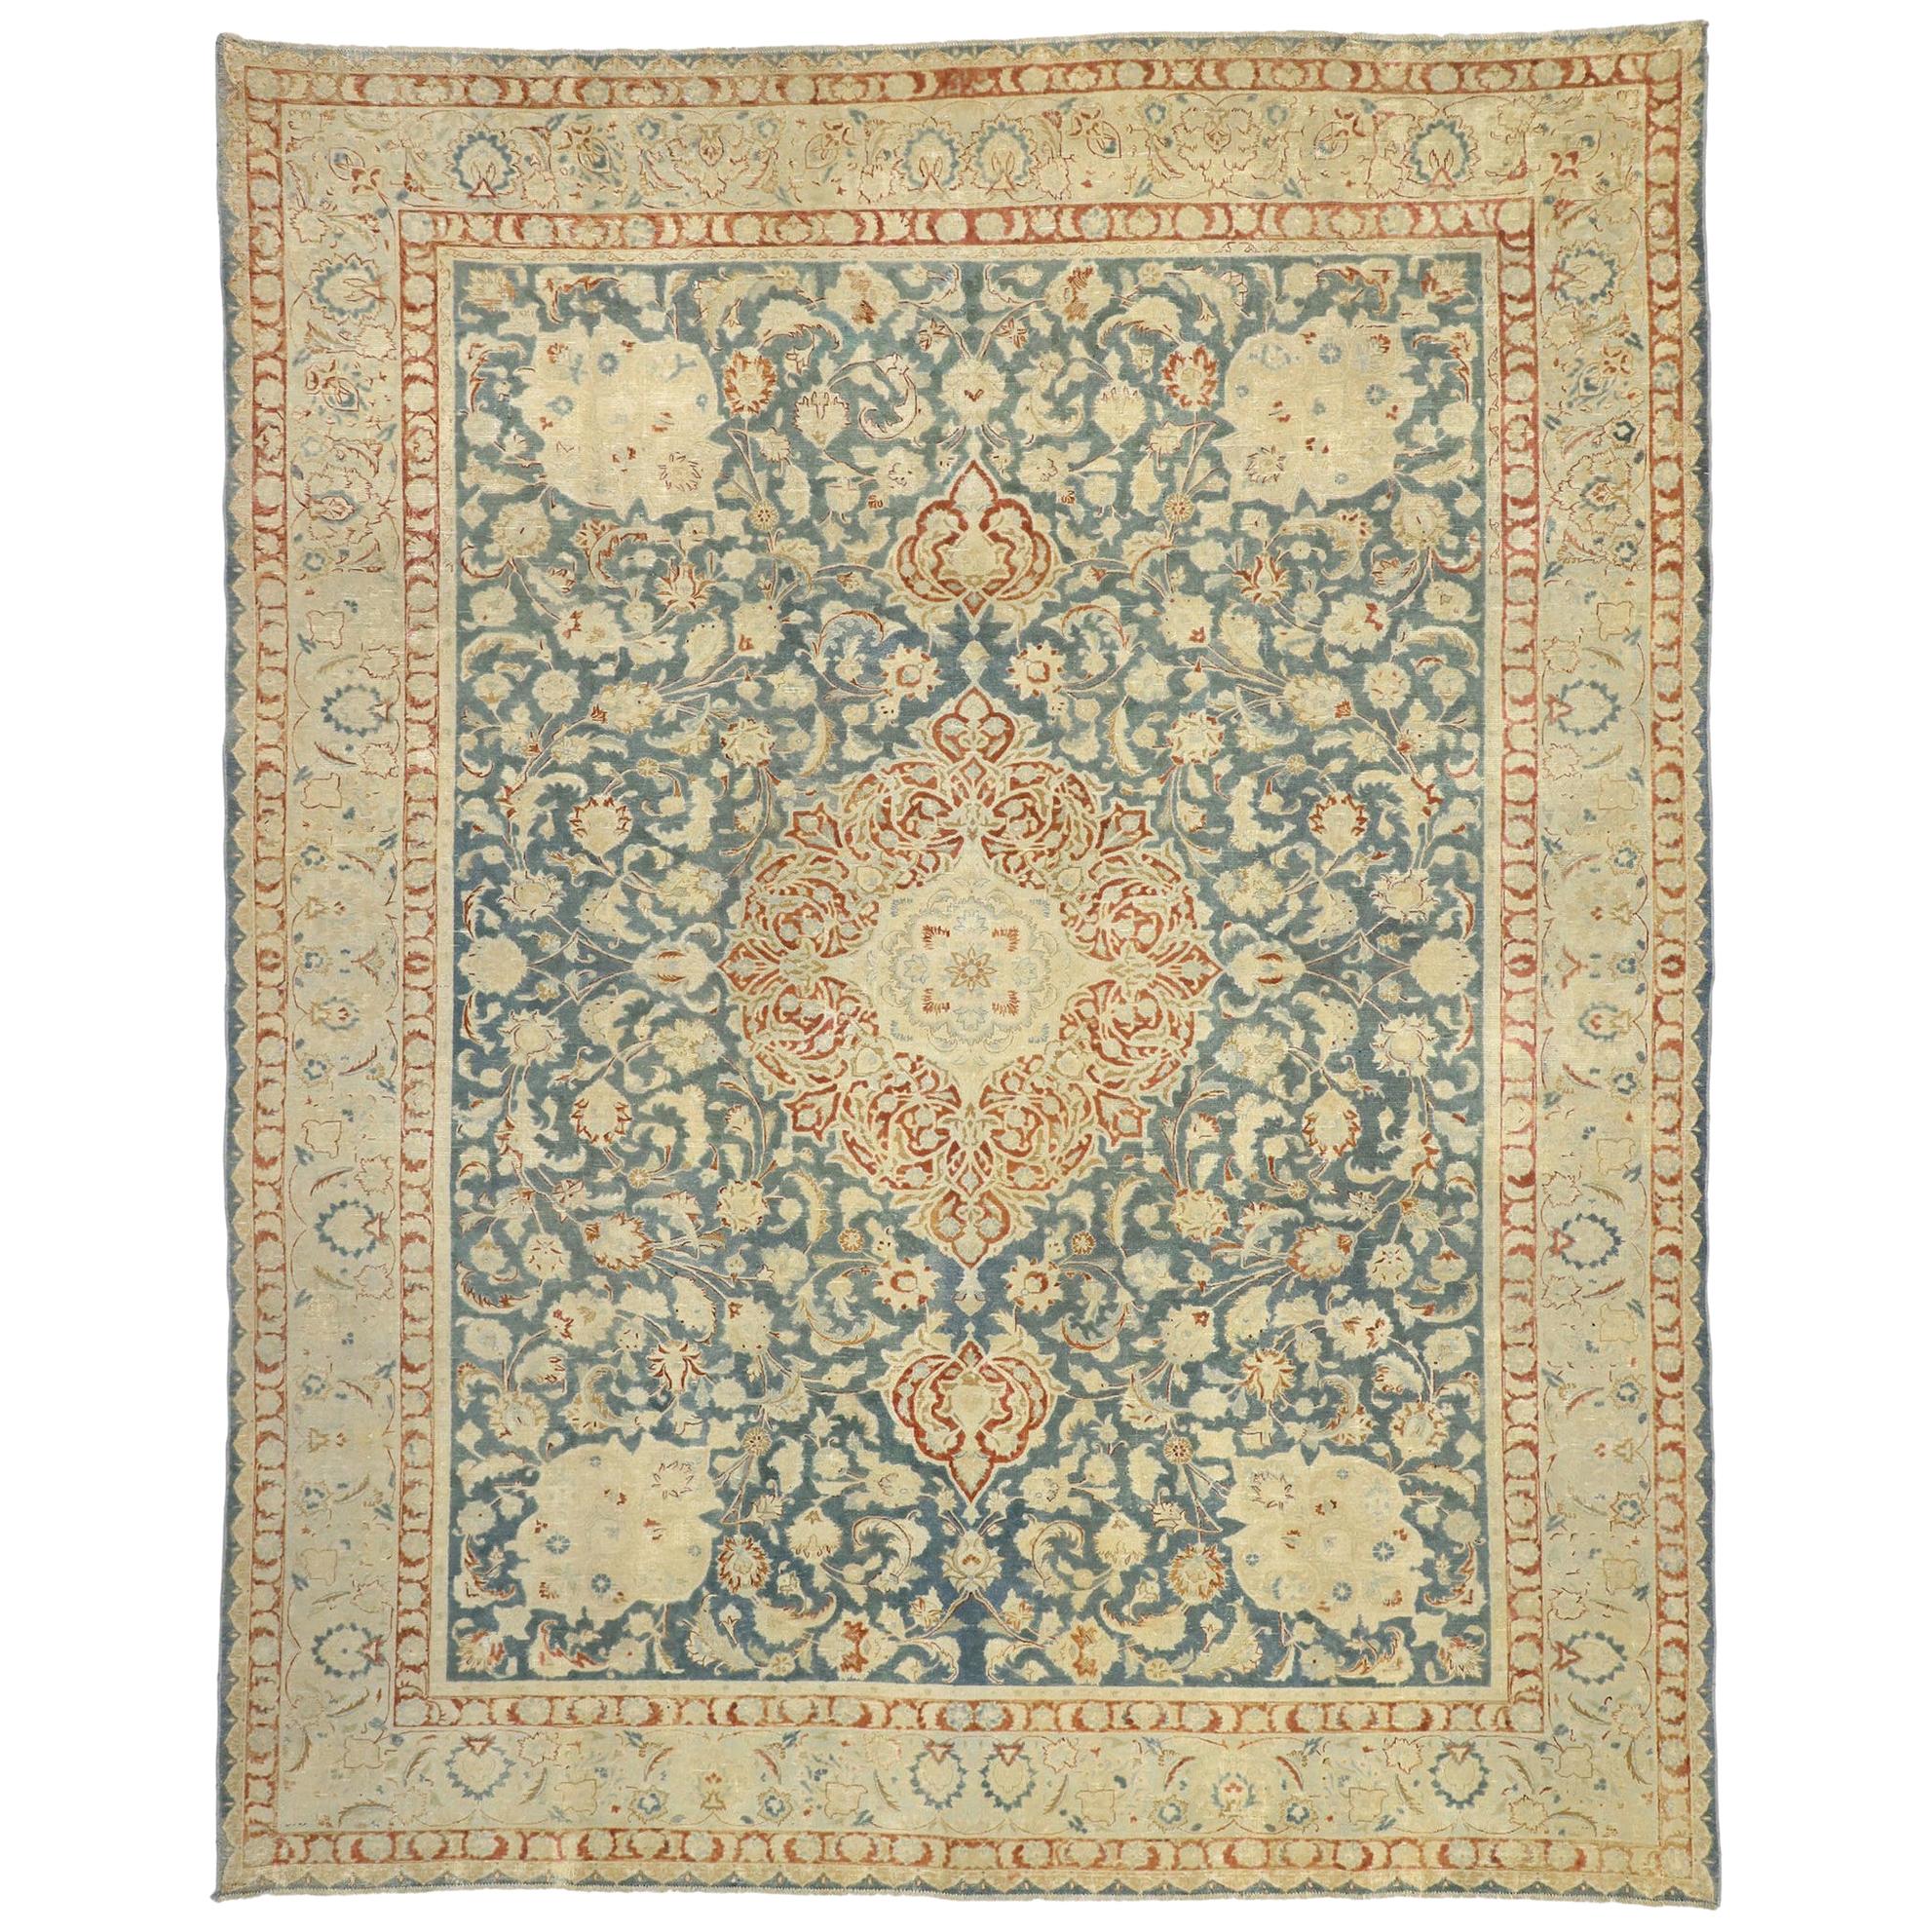 Distressed Antique Persian Heriz Design Rug with English Chintz Rustic Style